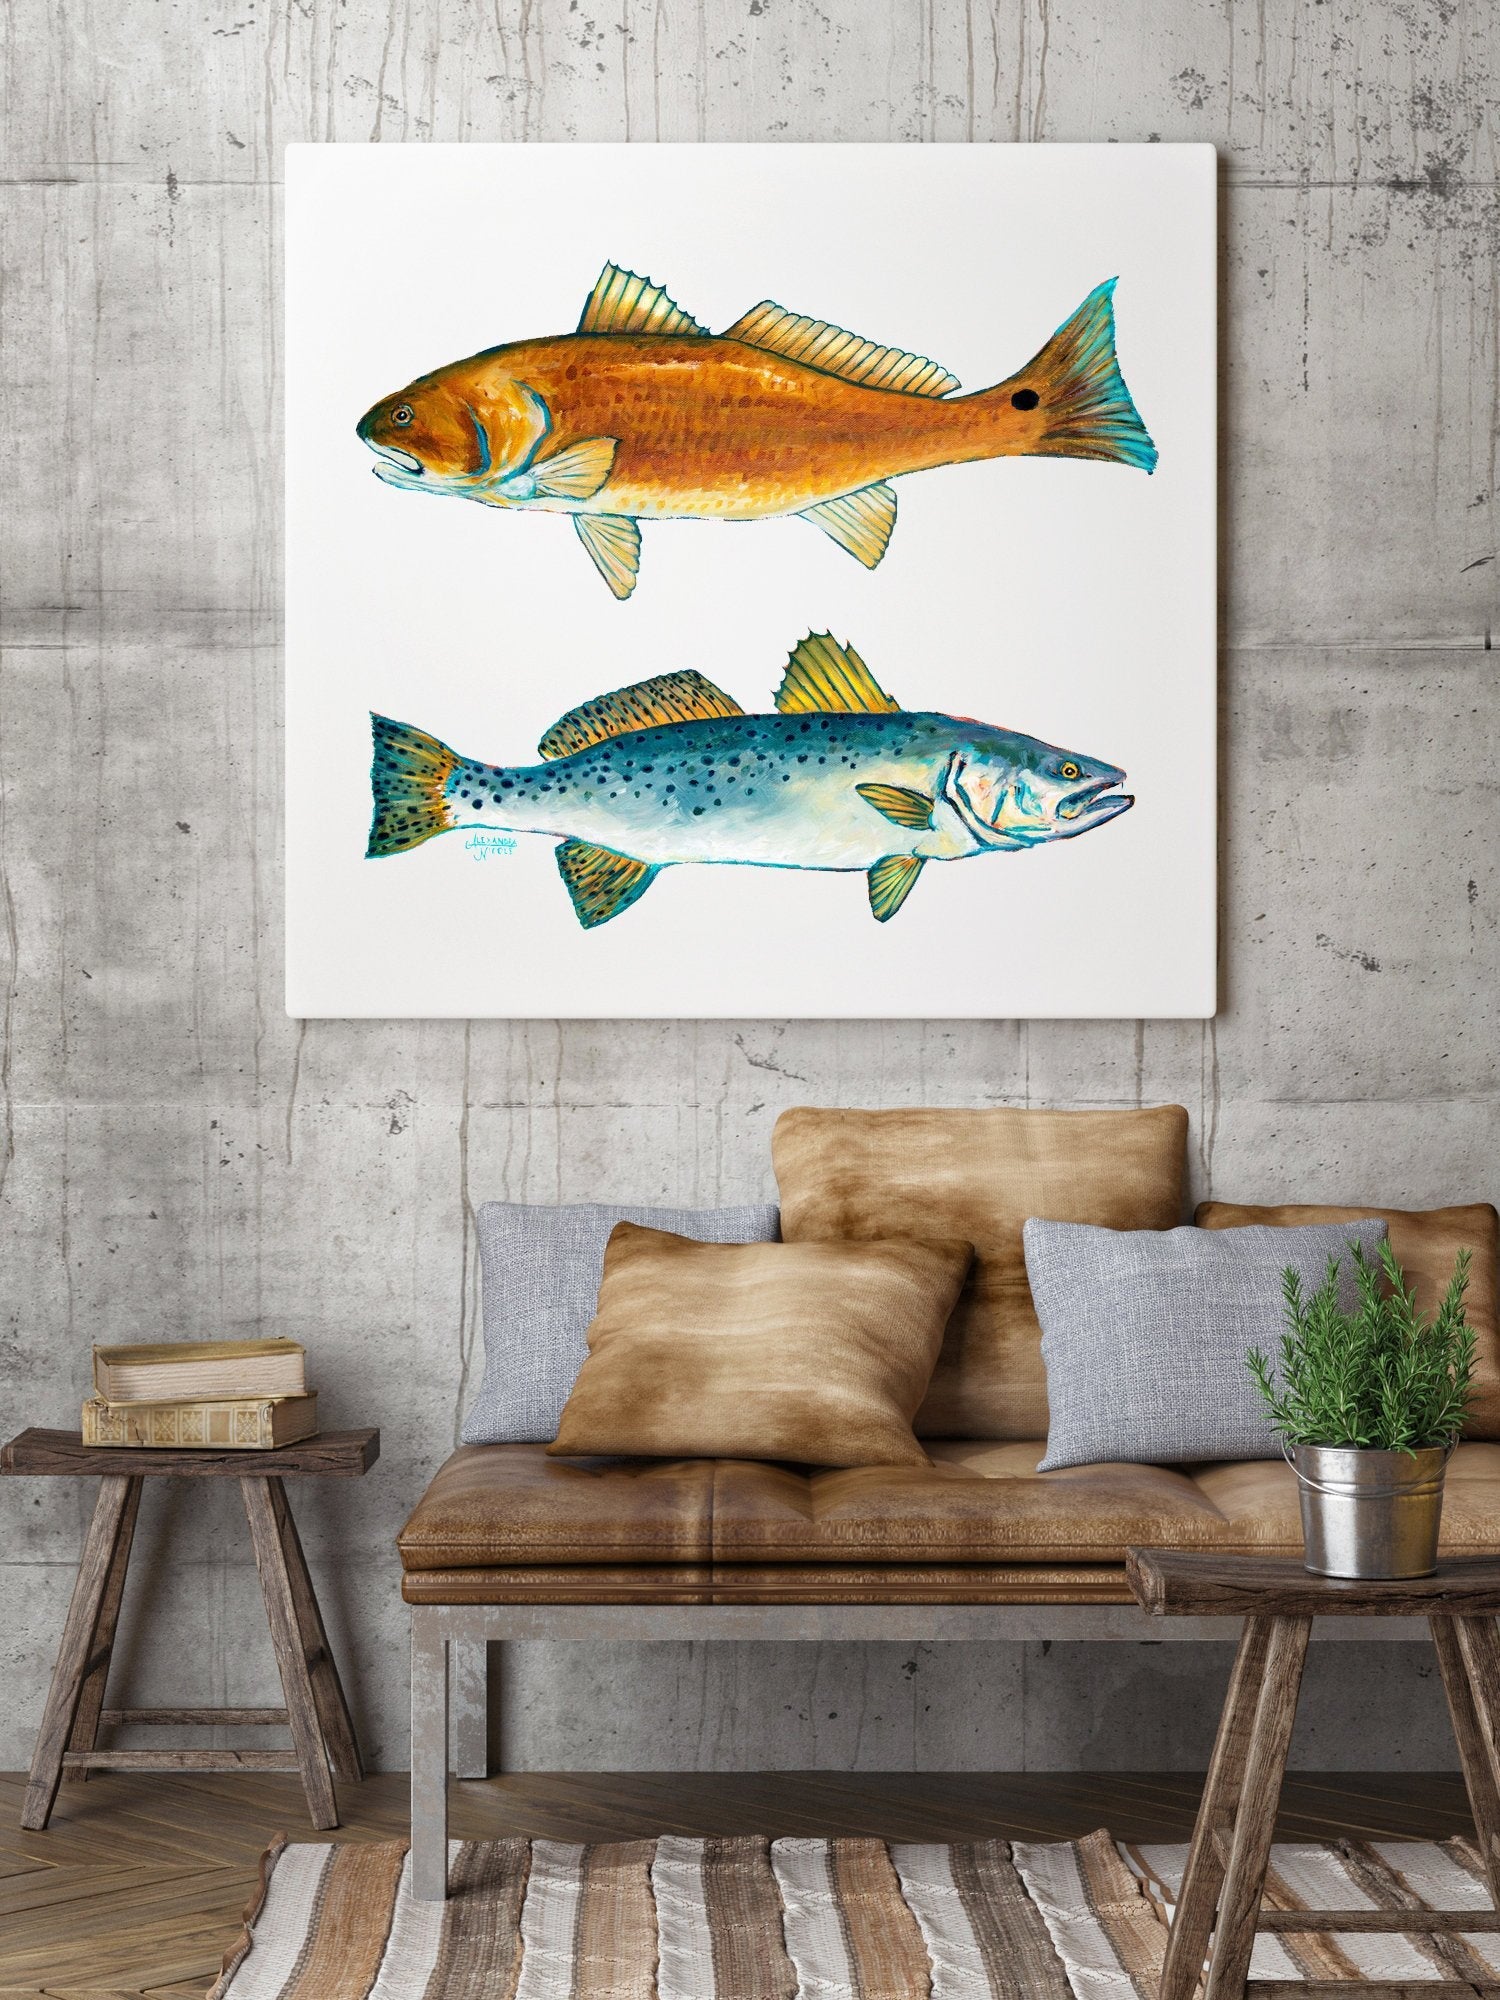 Red Drum Fish Print and Speckled Sea Trout Art Print - ArtByAlexandraNicole